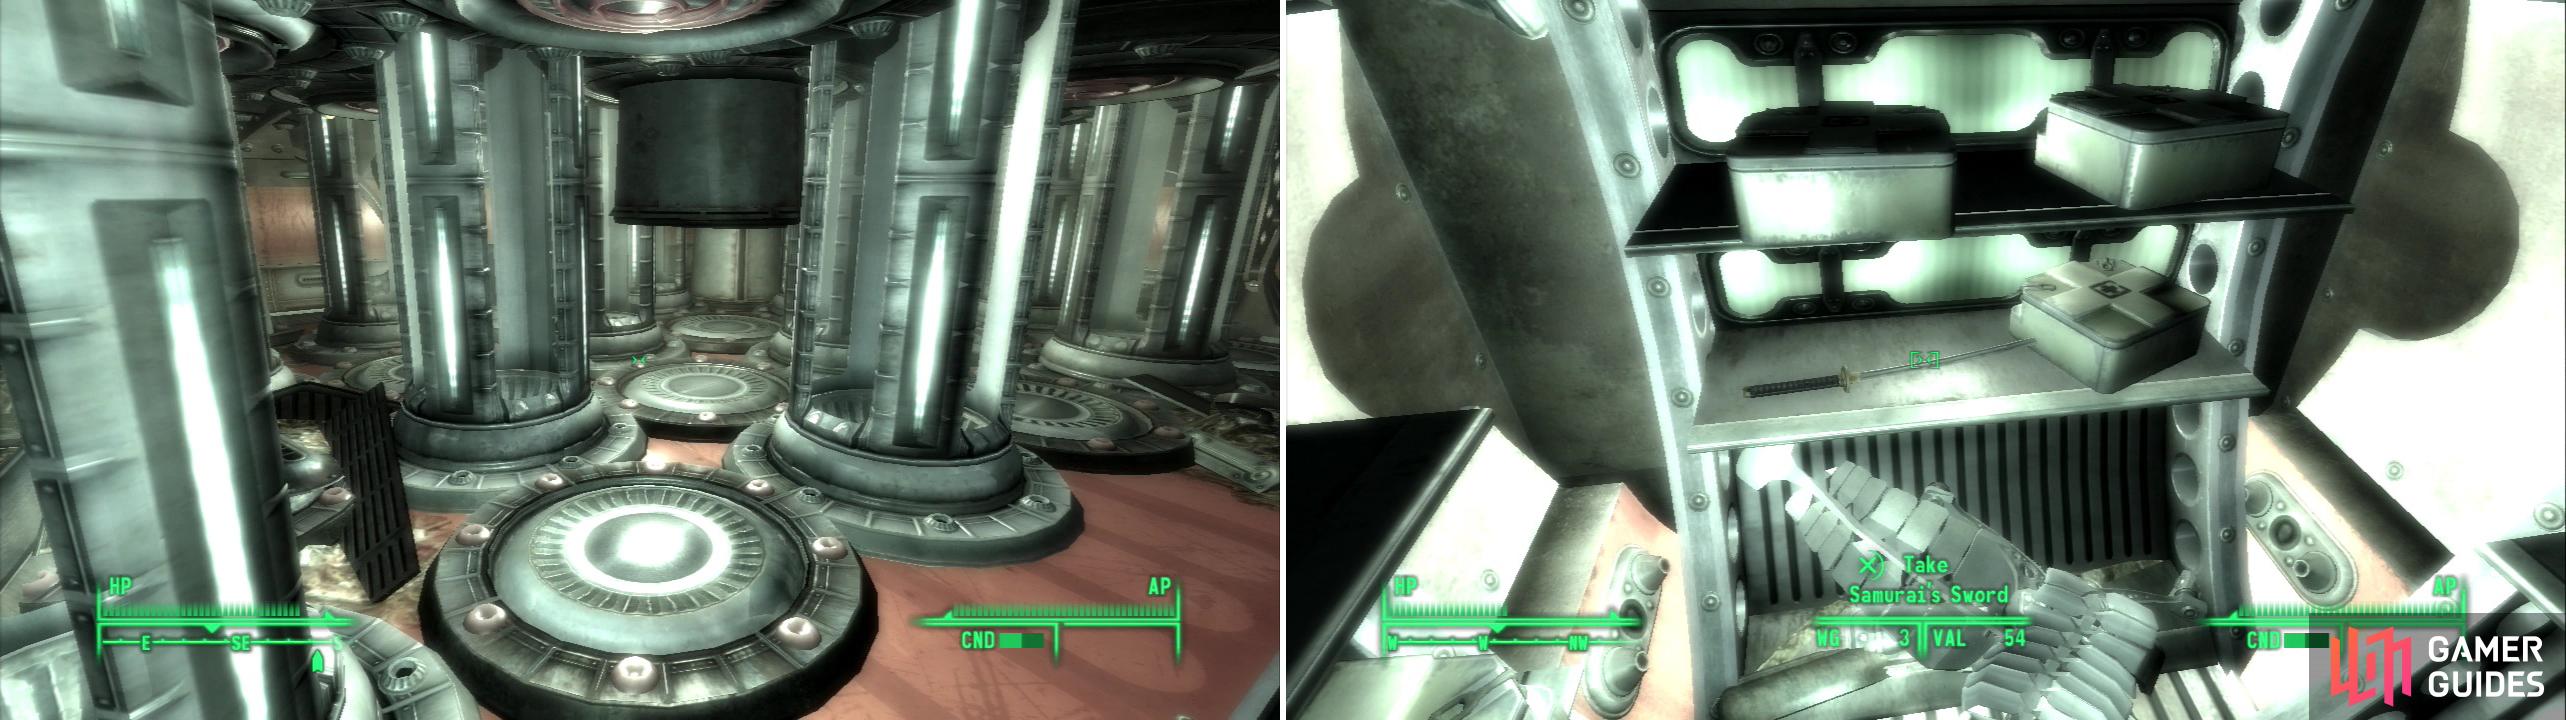 Watch out for active pistons, as they can deal damage if they smack you (left). Grab the Samurai Sword from the shelf (right), we might know somebody who wants this back…